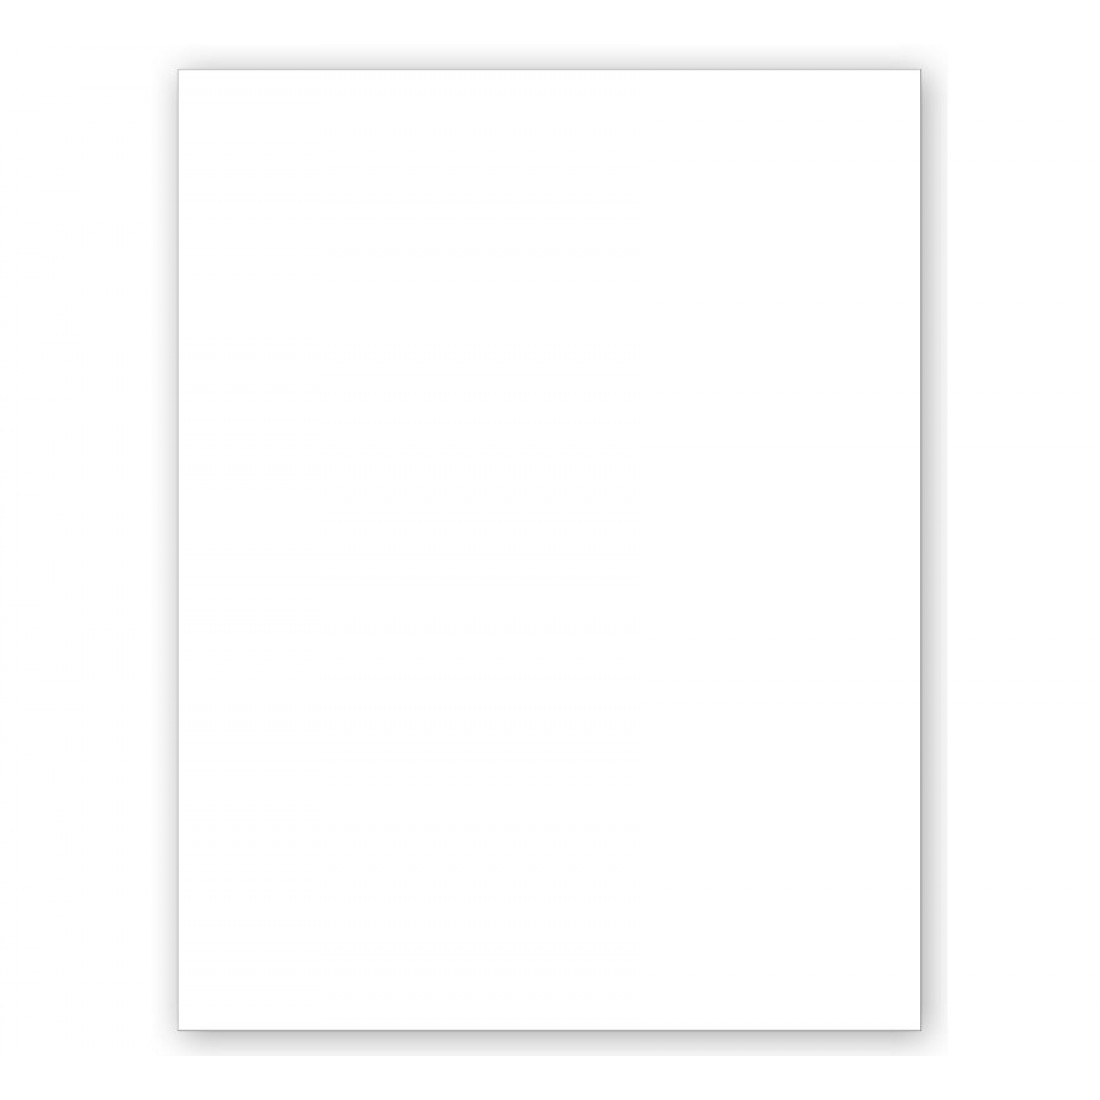 Will-Papers-White-Blank-Second-Sheet-20986-large.jpg